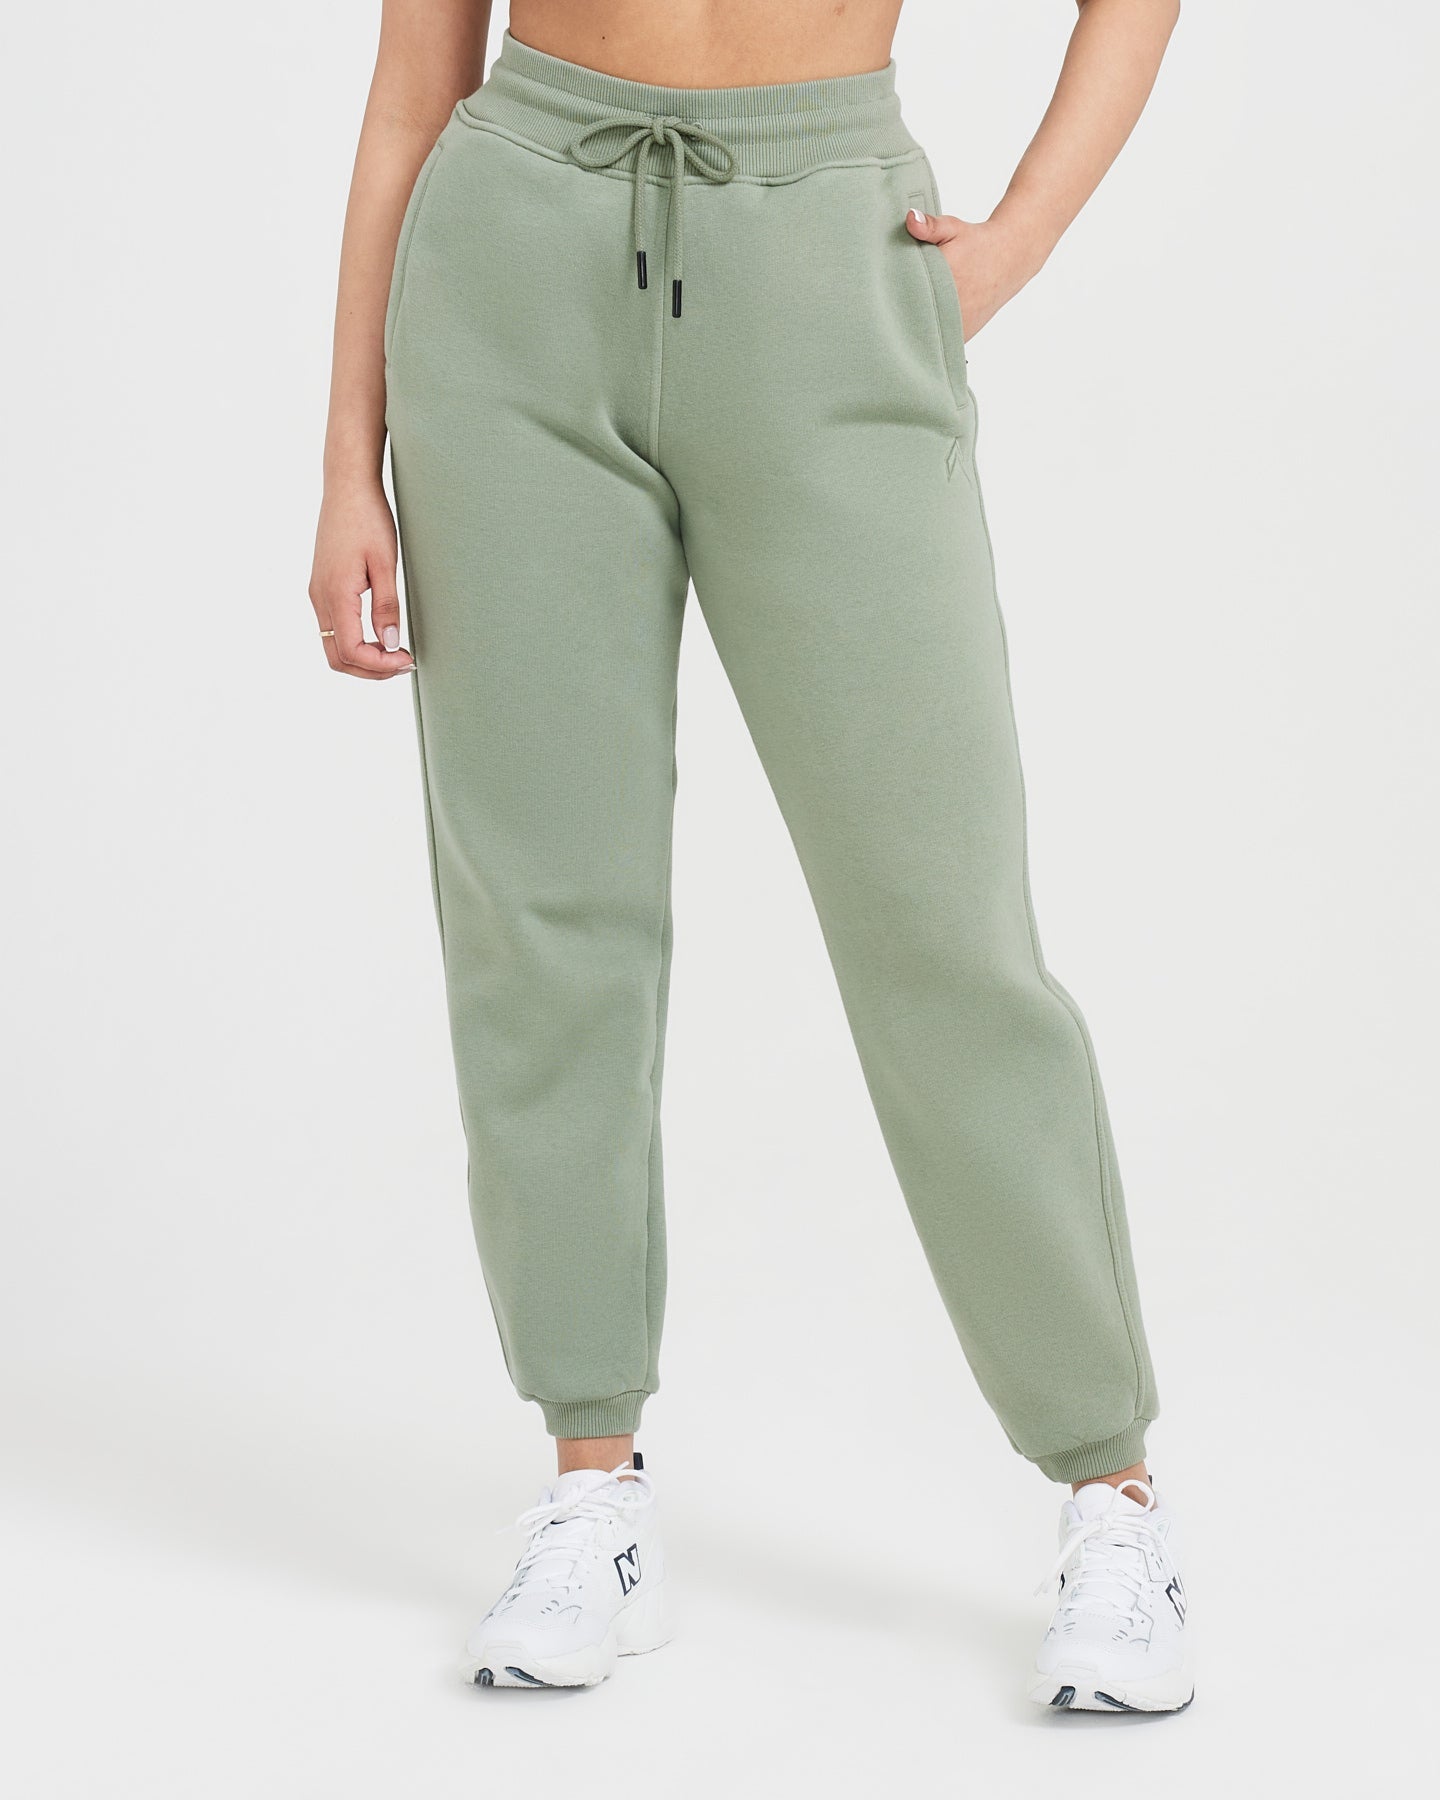 Women's Cosy Joggers - High Waist - Color Sage